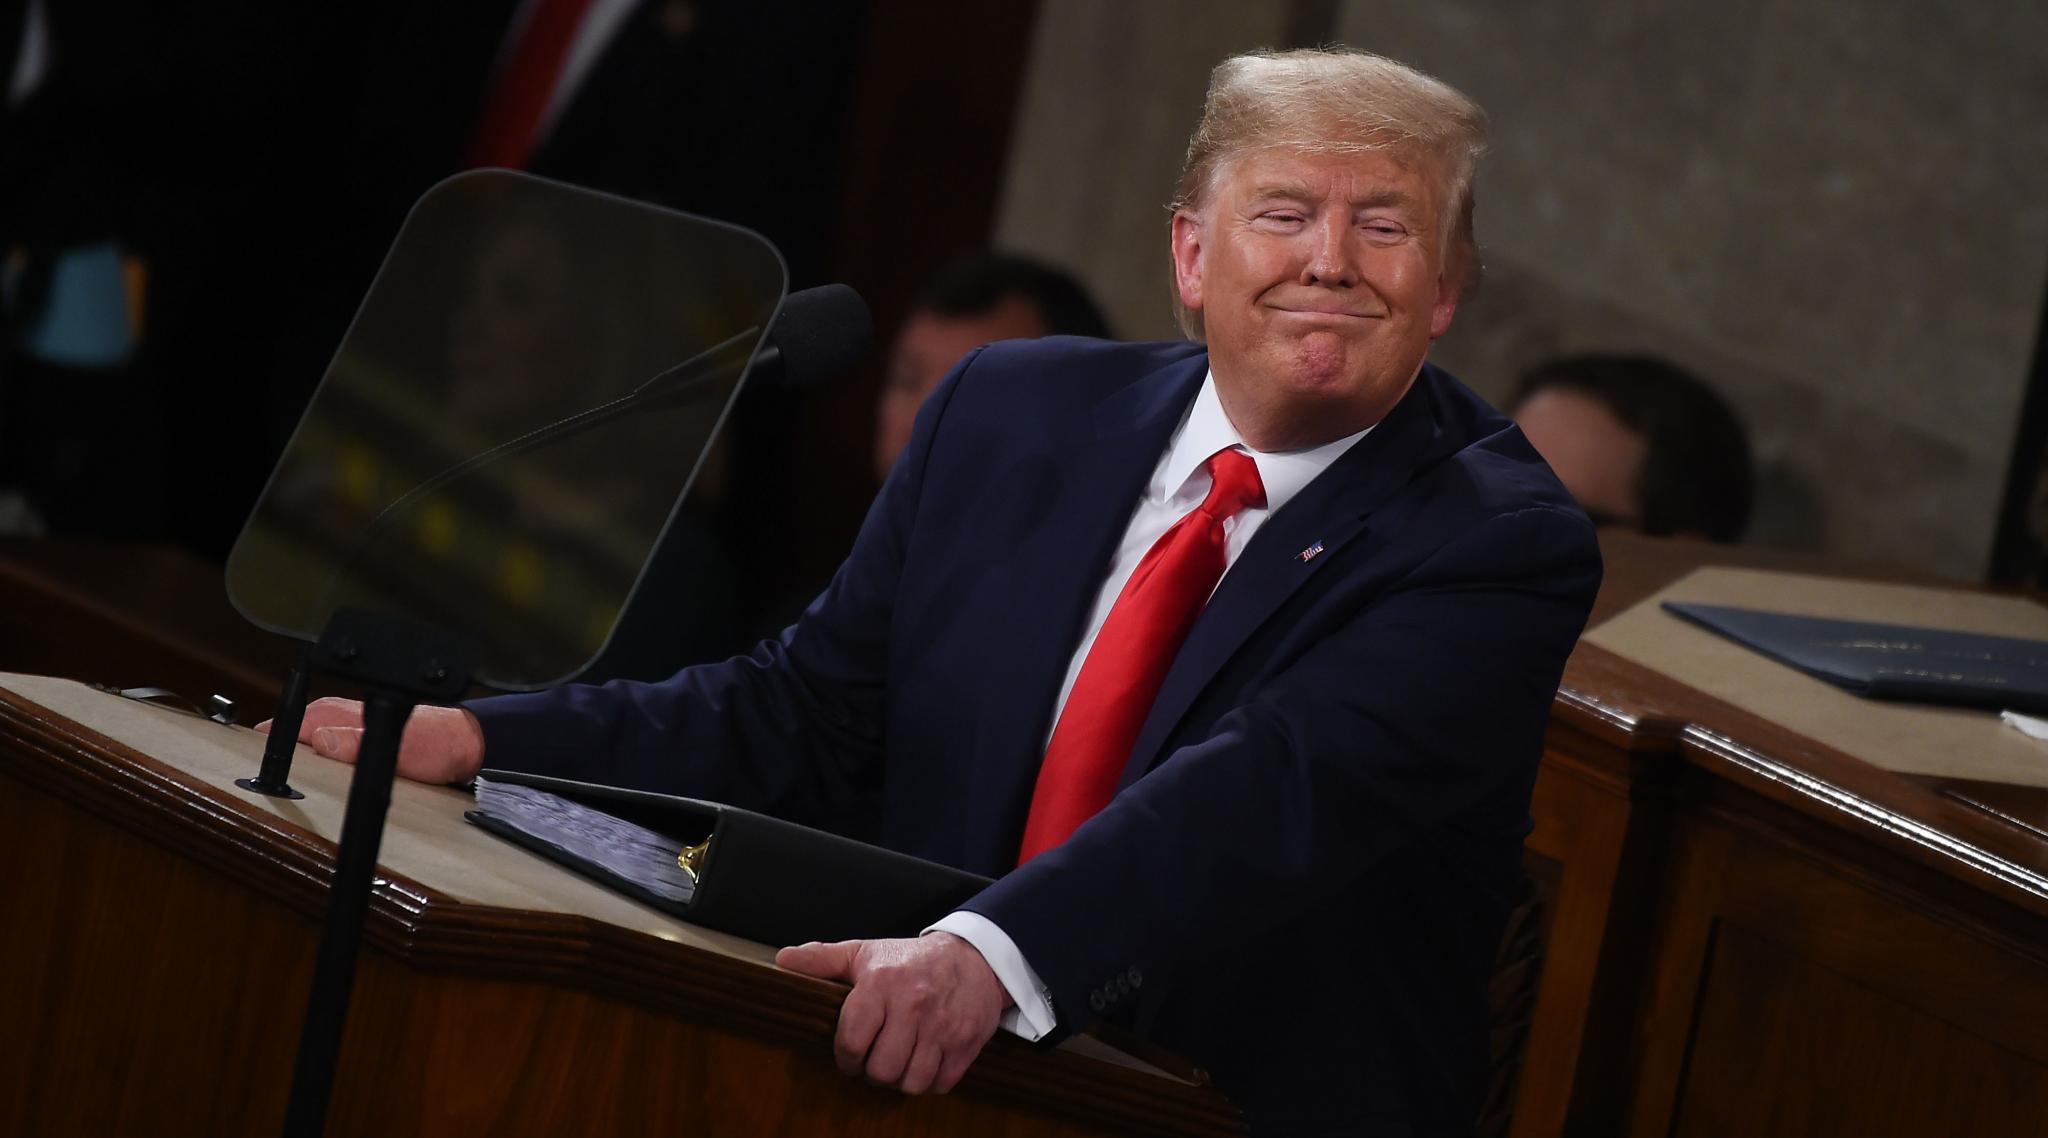 Donald Trump State of Union Address 2020: Inviting Rival to Speech, US President Vows ...2048 x 1138